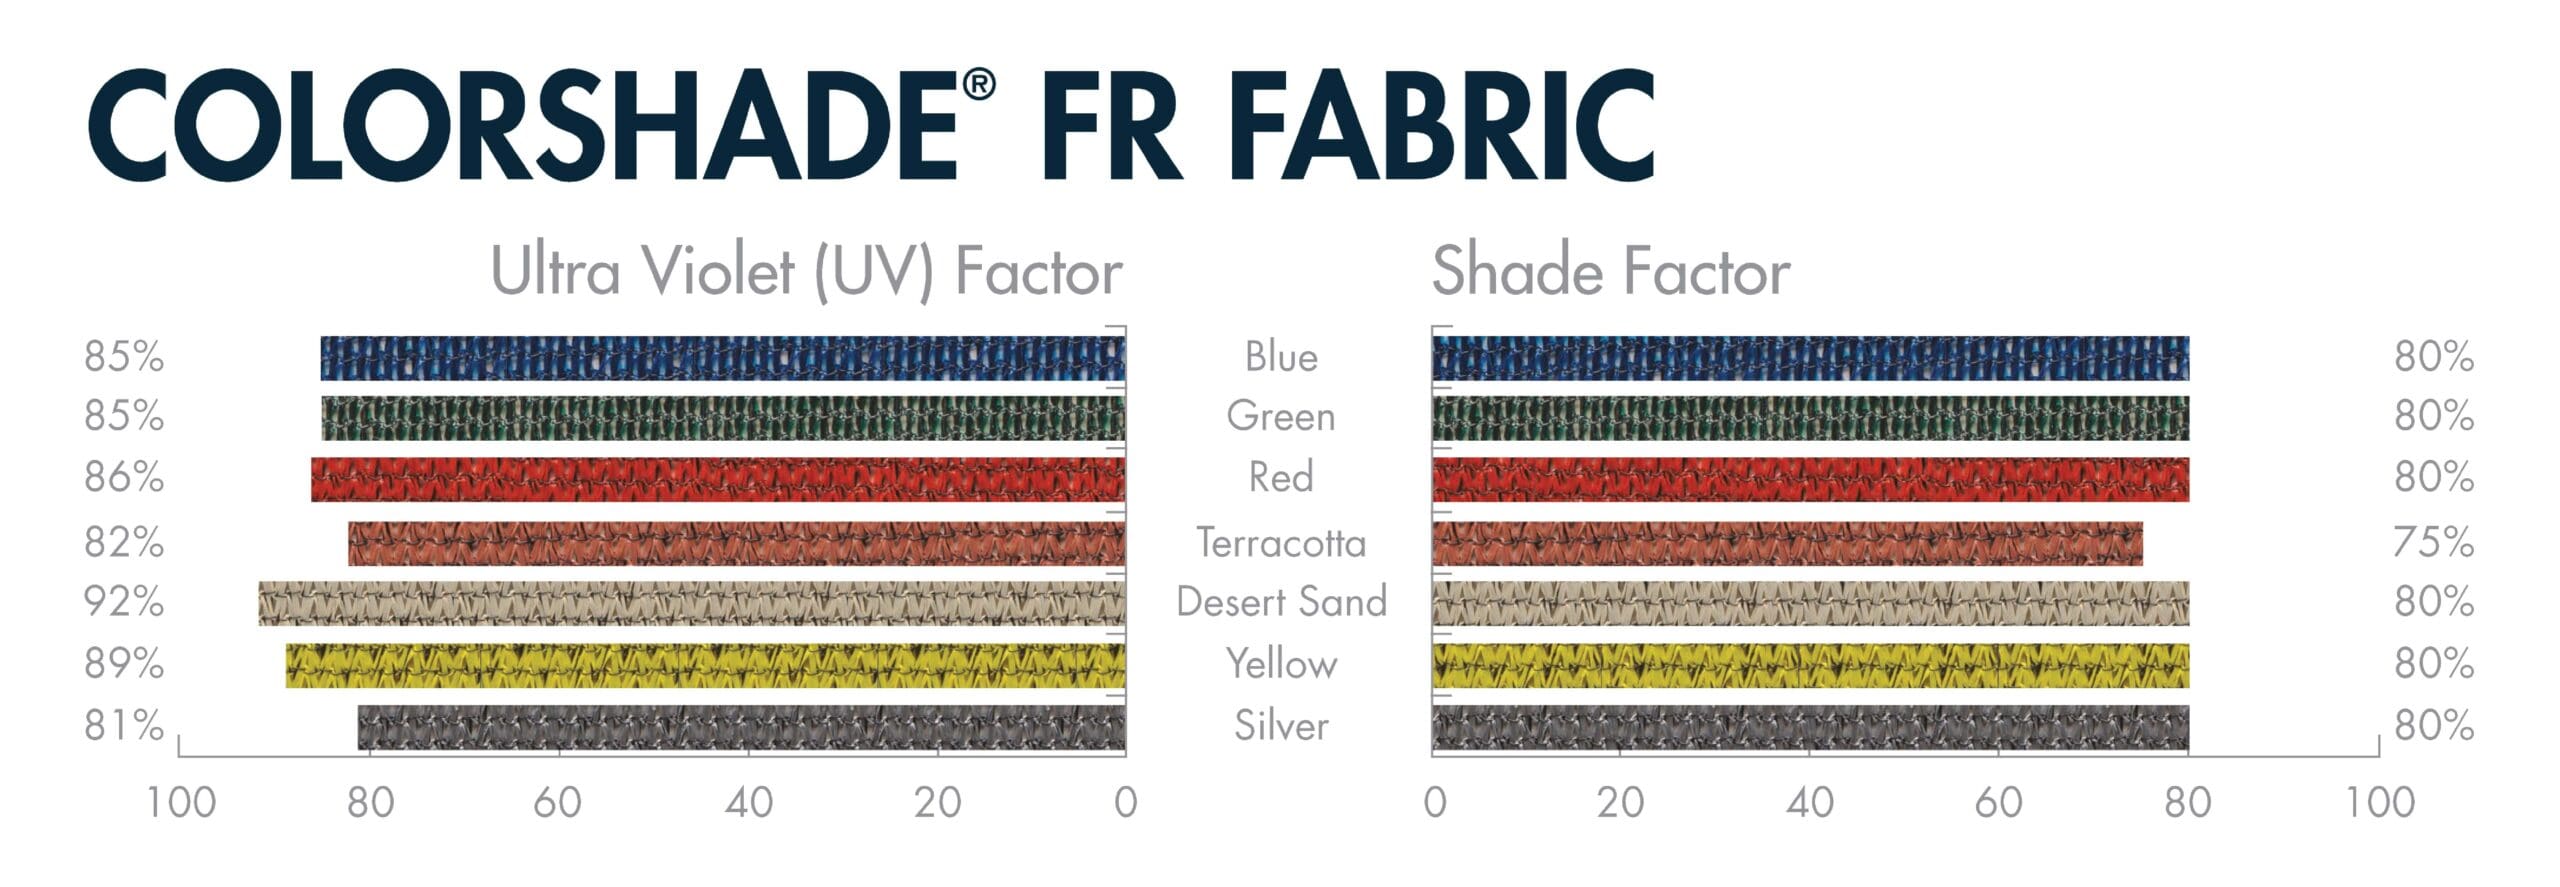 A chart that shows Colorshade FR fabric by Ultra Violet and Shade Factors.